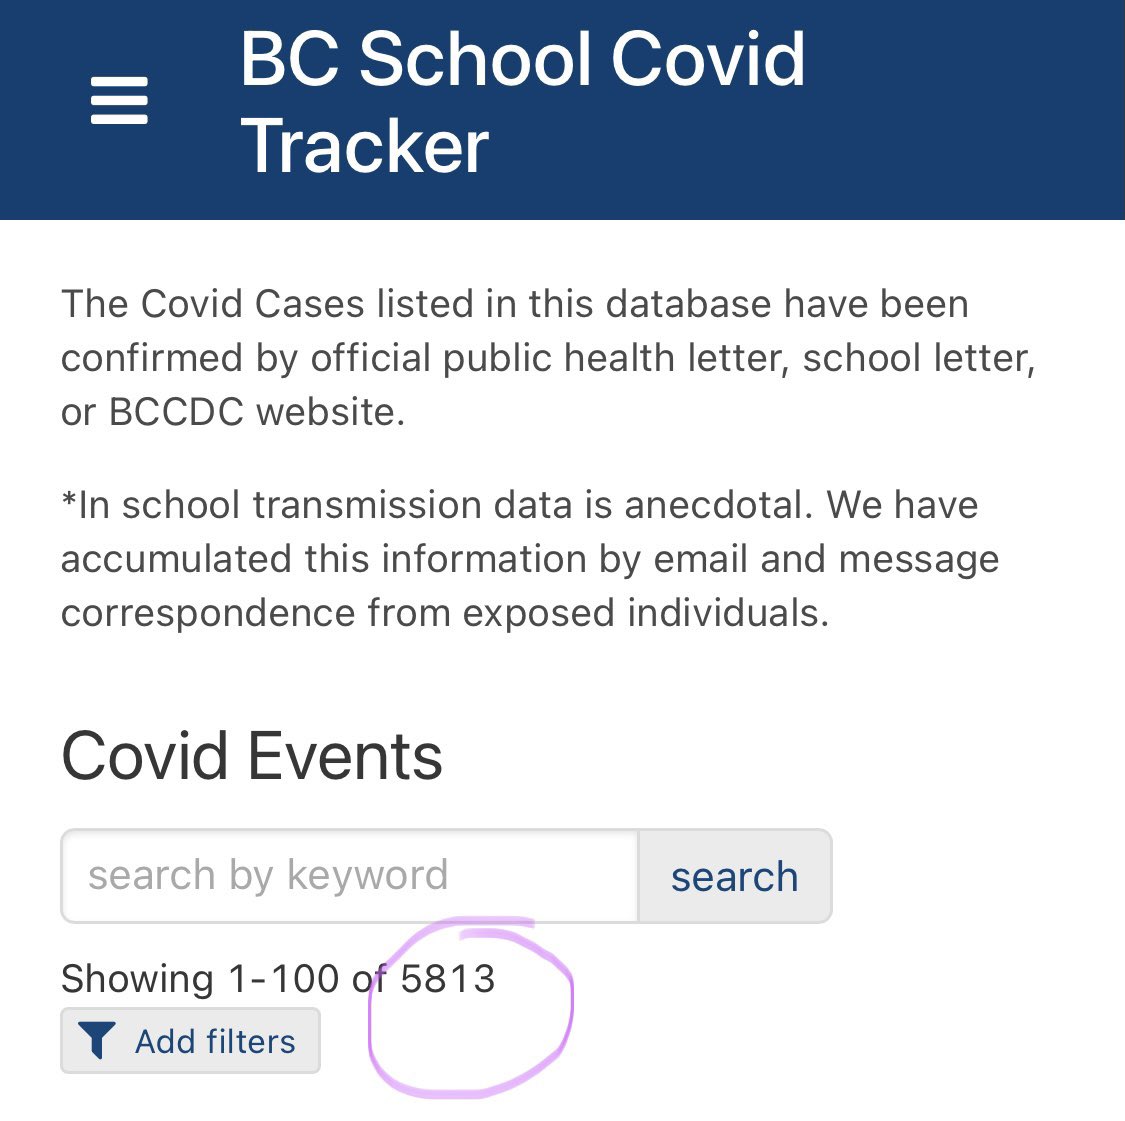 12/ We know of 5813 School infection notices. Each infection notice can be for 1 or 50 infected people. There are many thousands who’ve been infected and no notice to the community has gone out. Link:  https://bcschoolcovidtracker.knack.com/bc-school-covid-tracker#home/ #bced  #bcpoli  #covid19BC